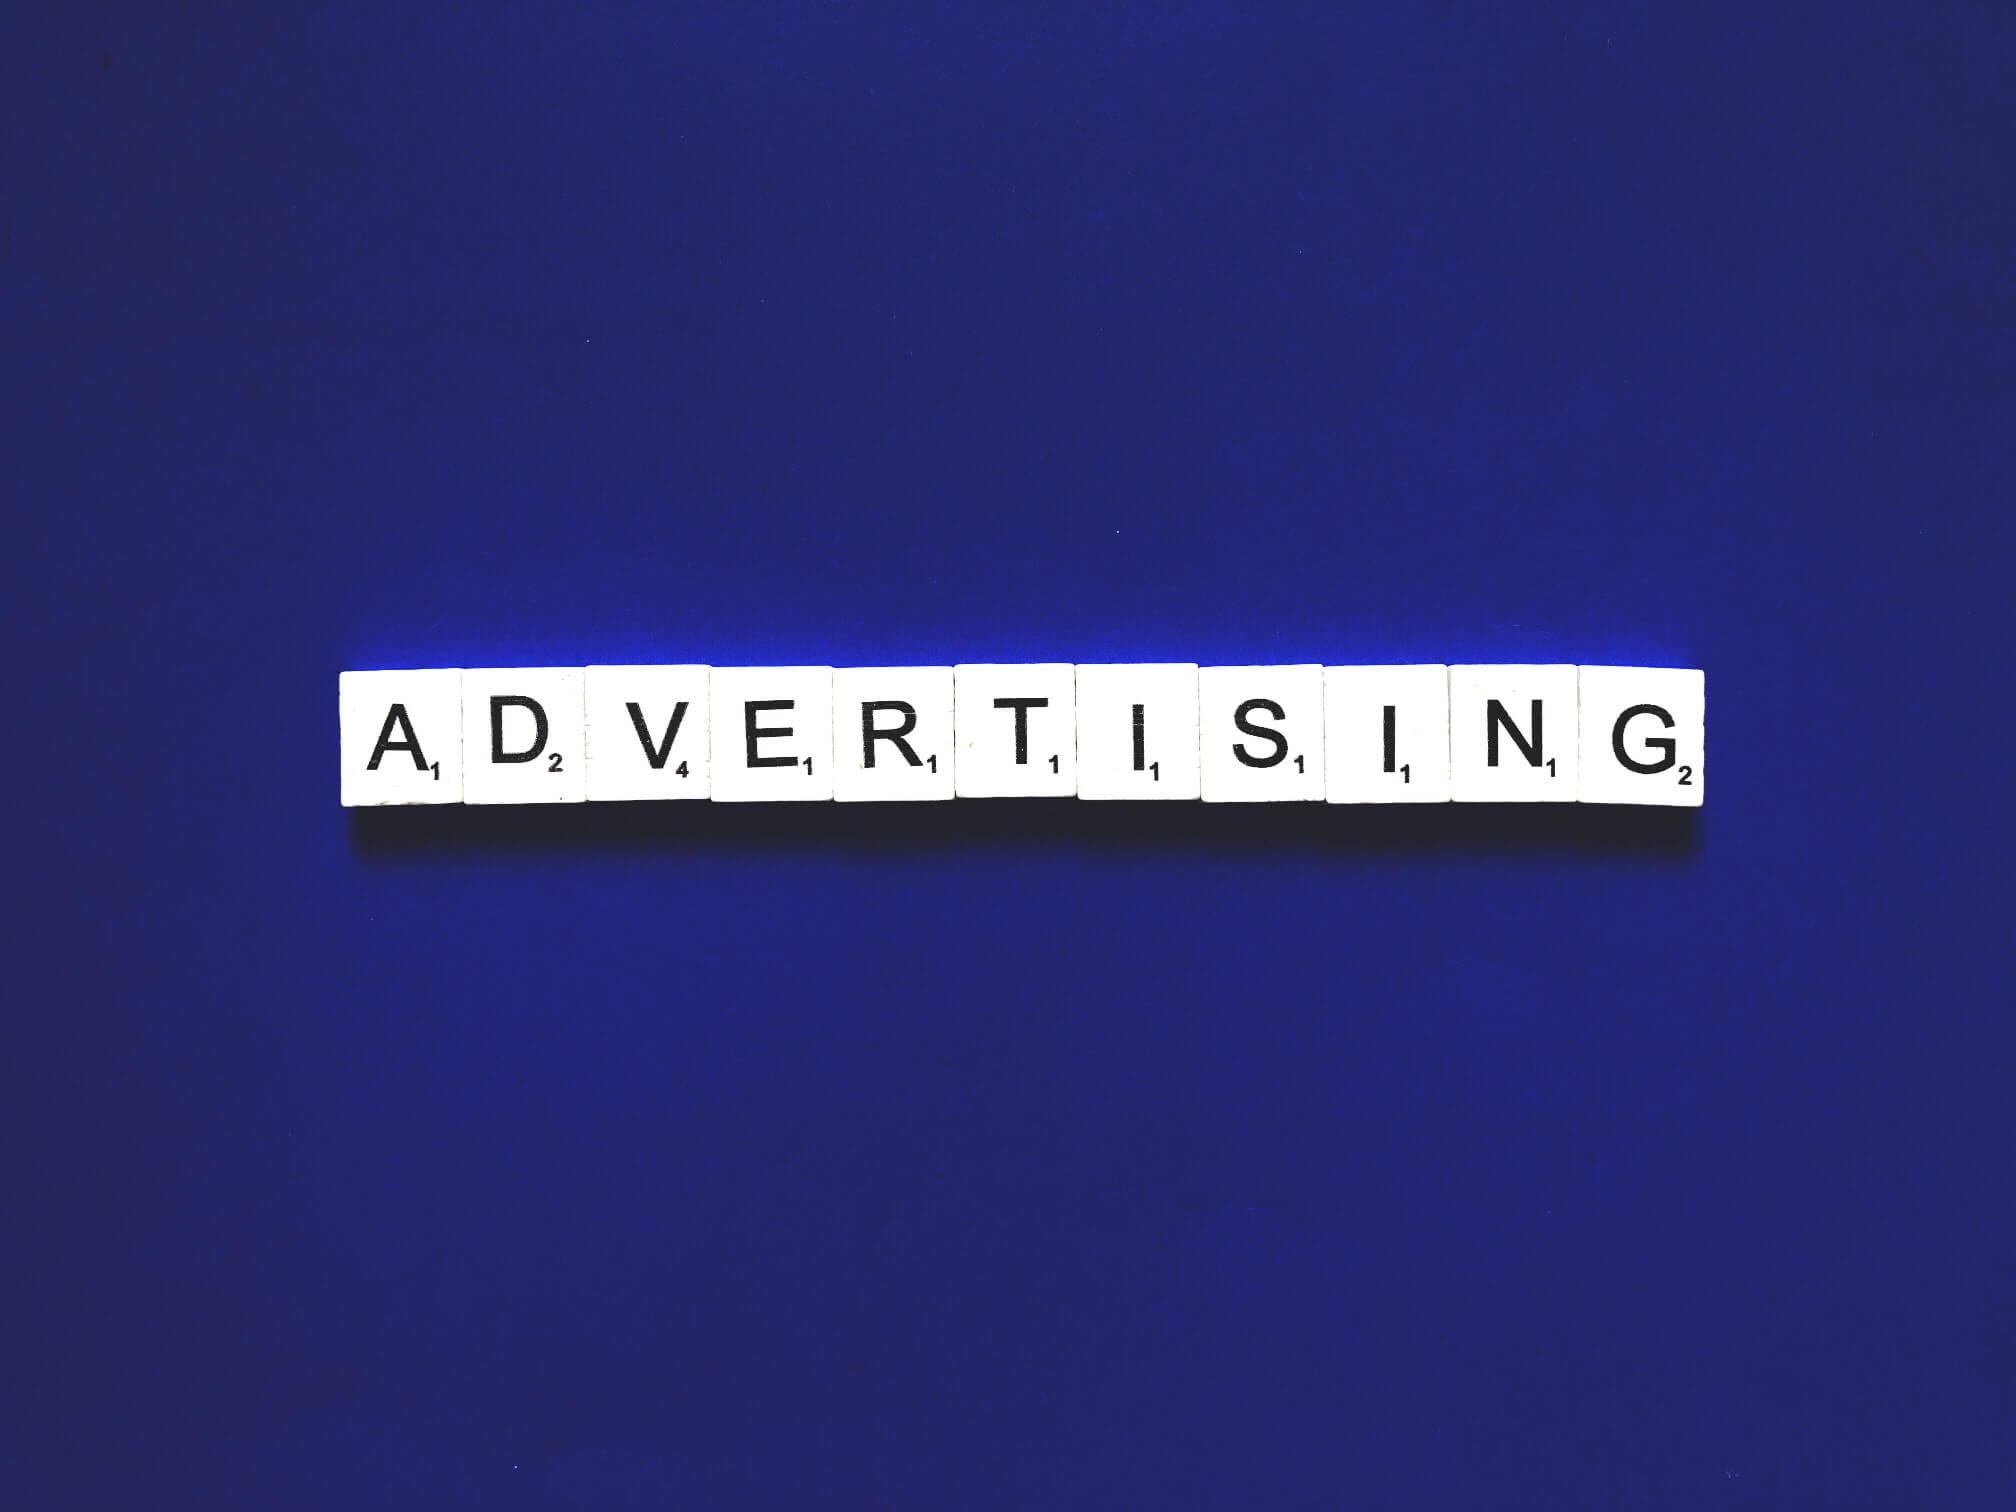 History and Evolution of Advertisement